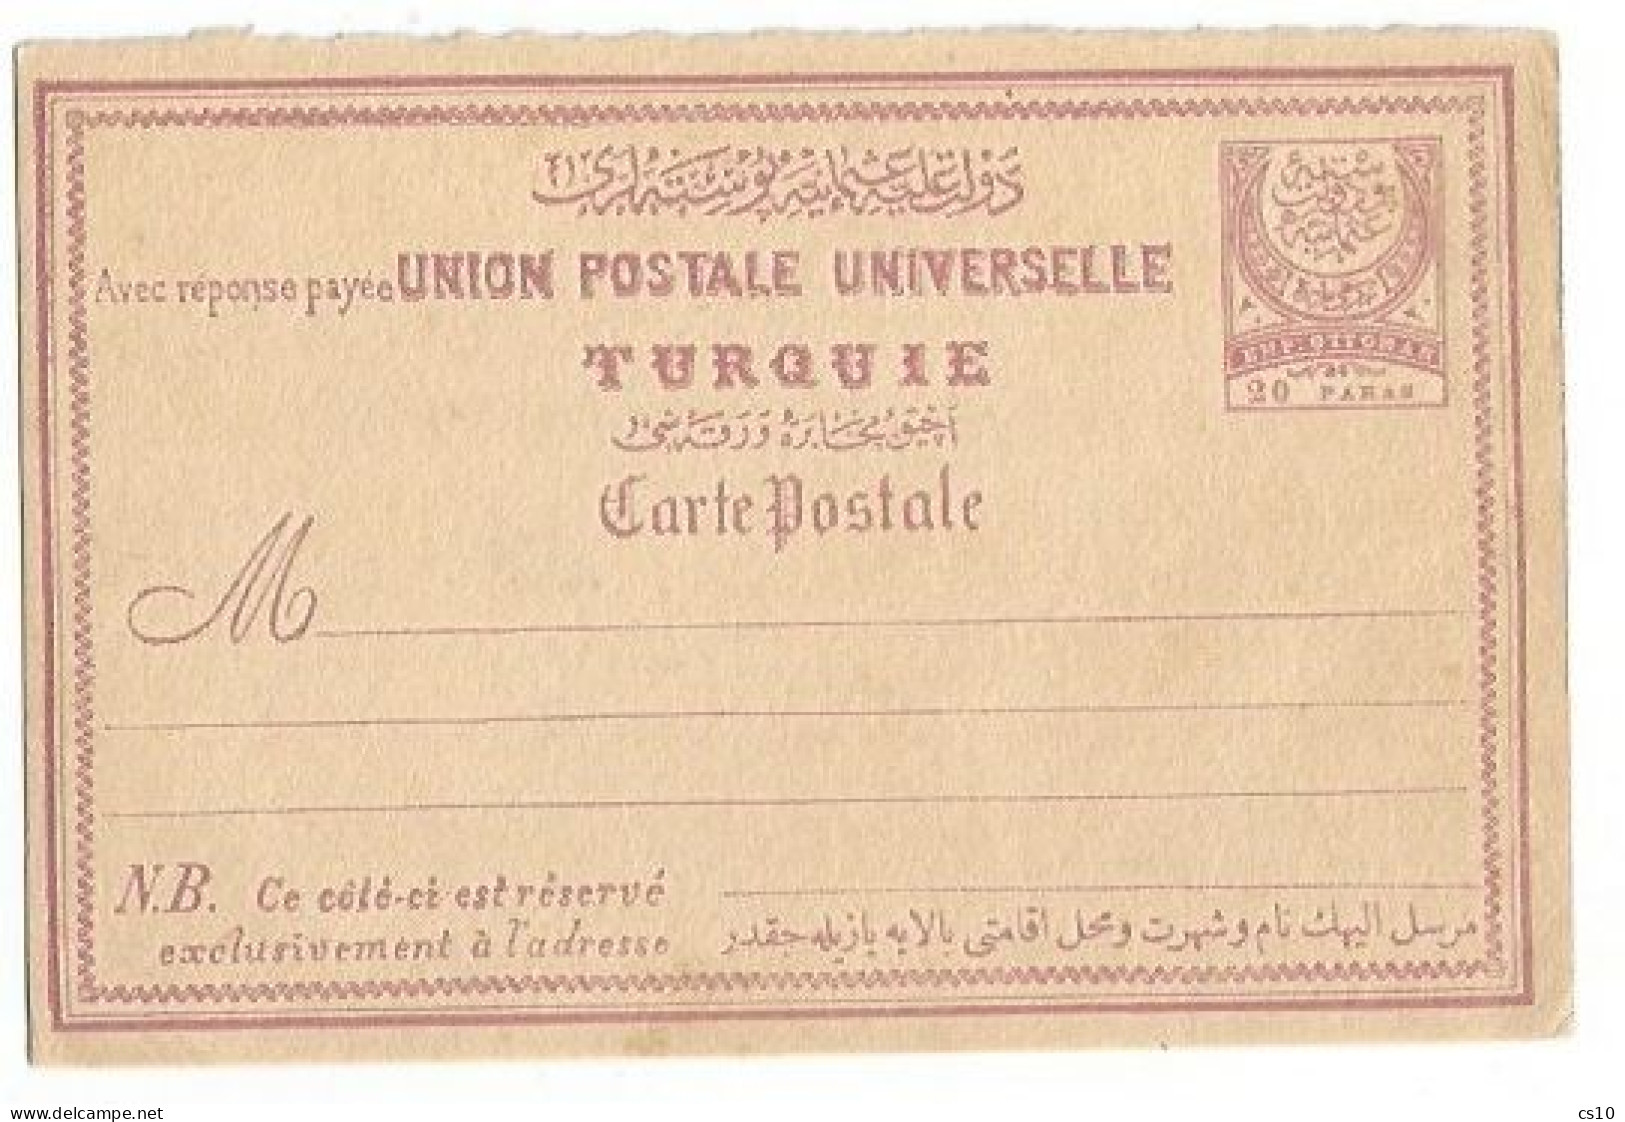 Turkey Ottoman Empire PSC Stationery Card 20paras (Only Question Part) - Unused - Postal Stationery